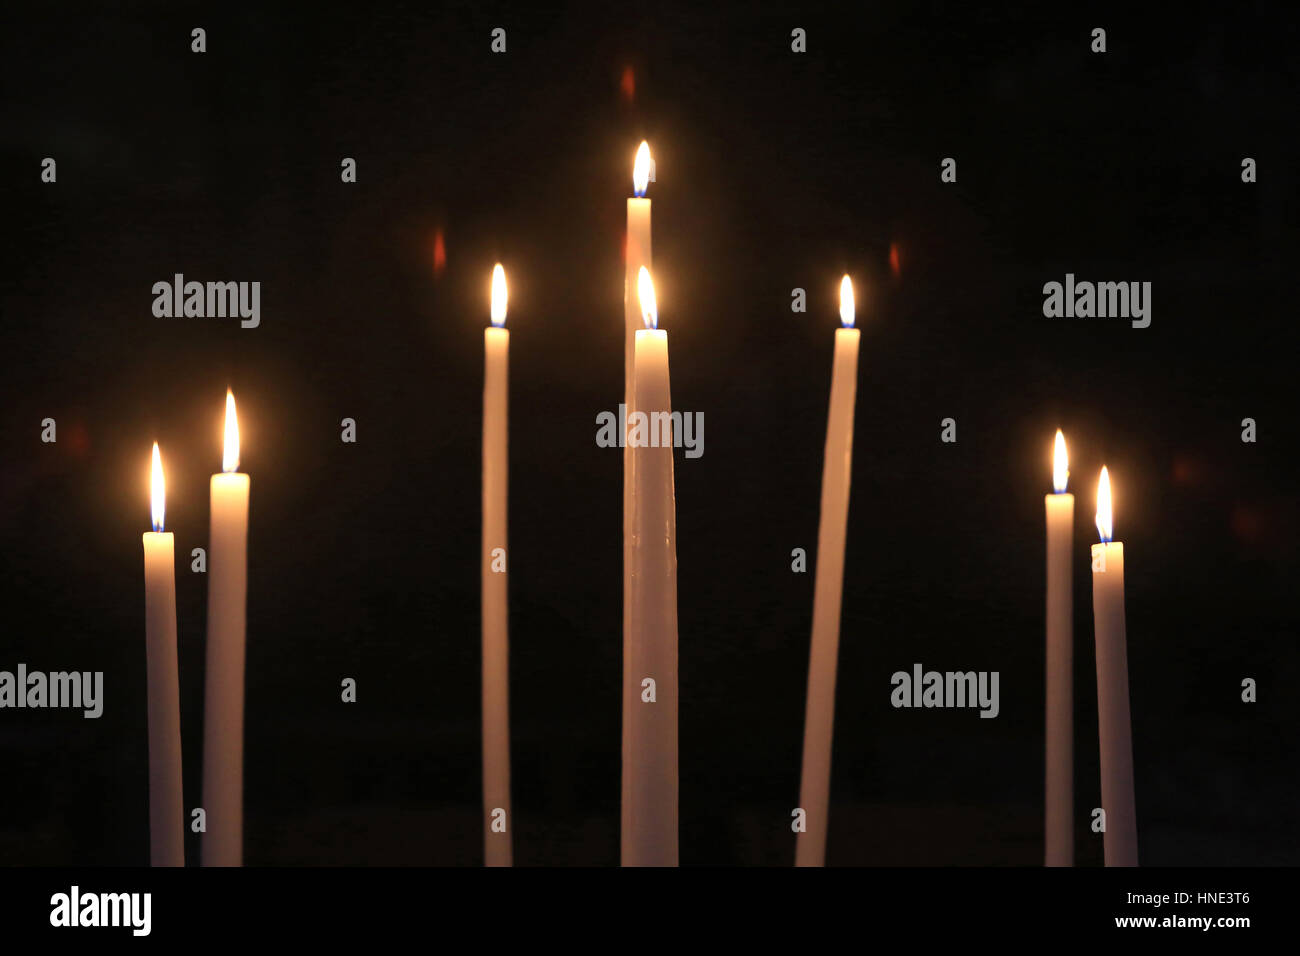 Canddles. Stock Photo